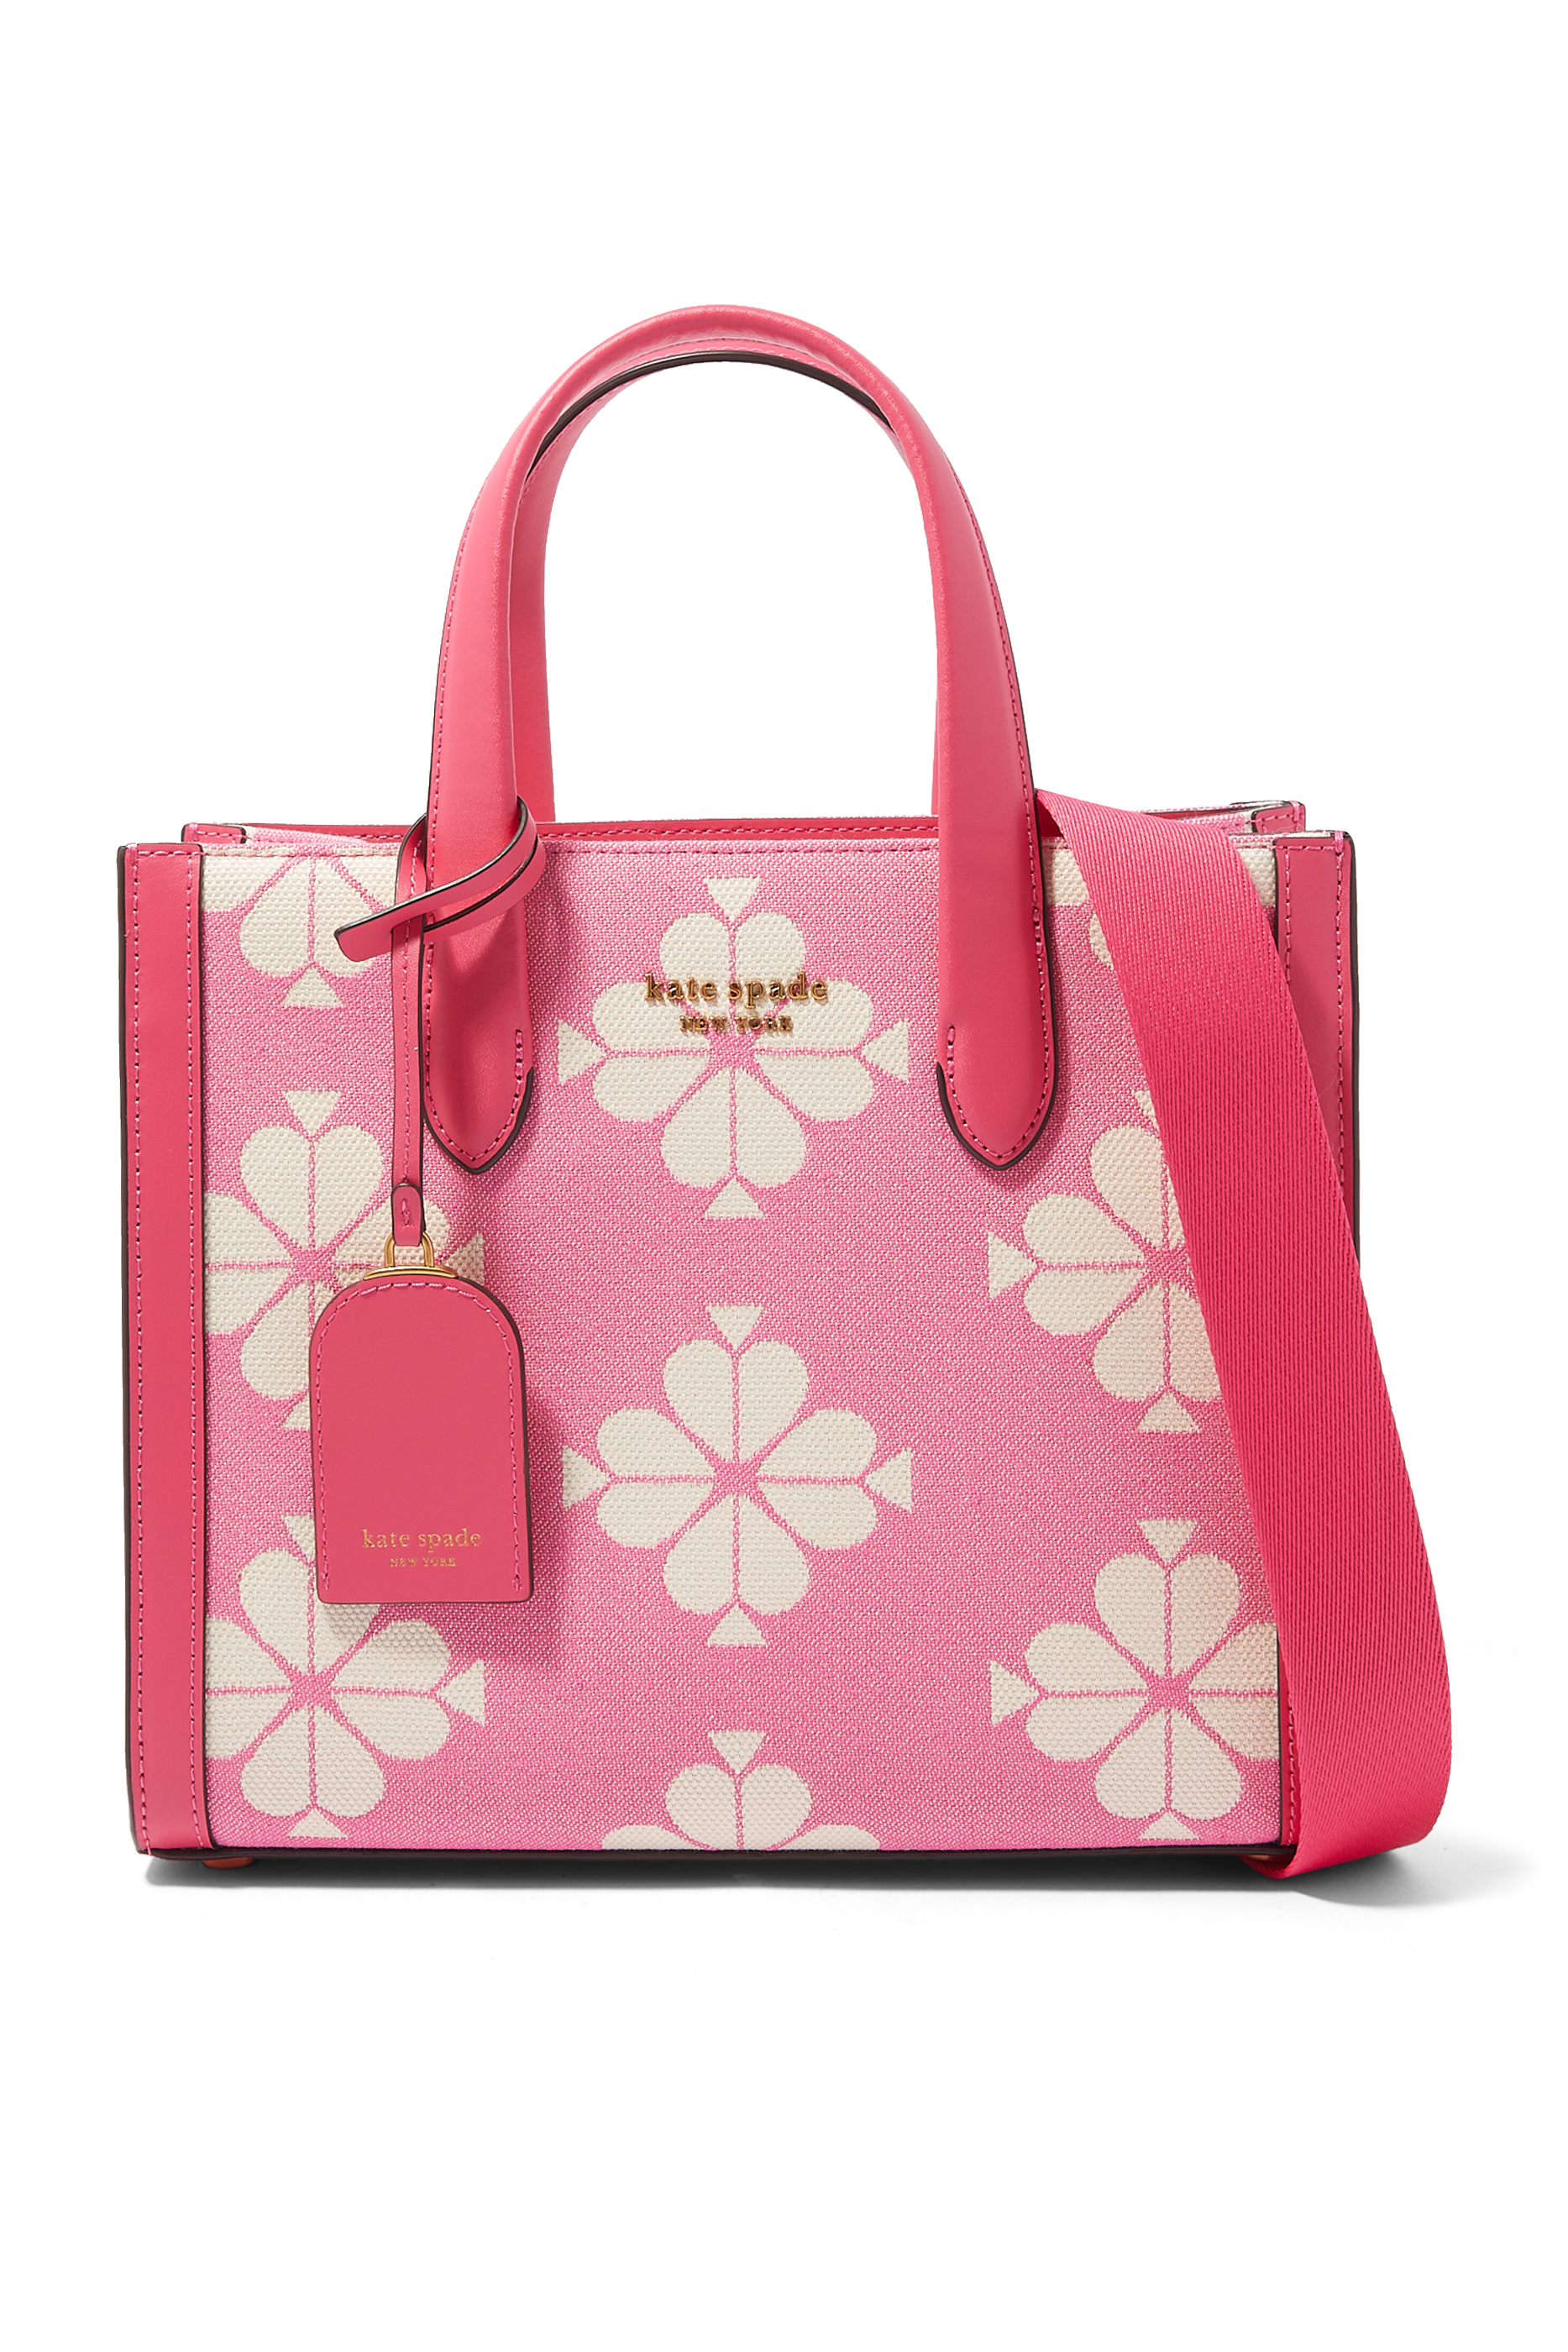 Kate Spade Has A Flower Bag That's As Quirky As It Gets... - BAGAHOLICBOY